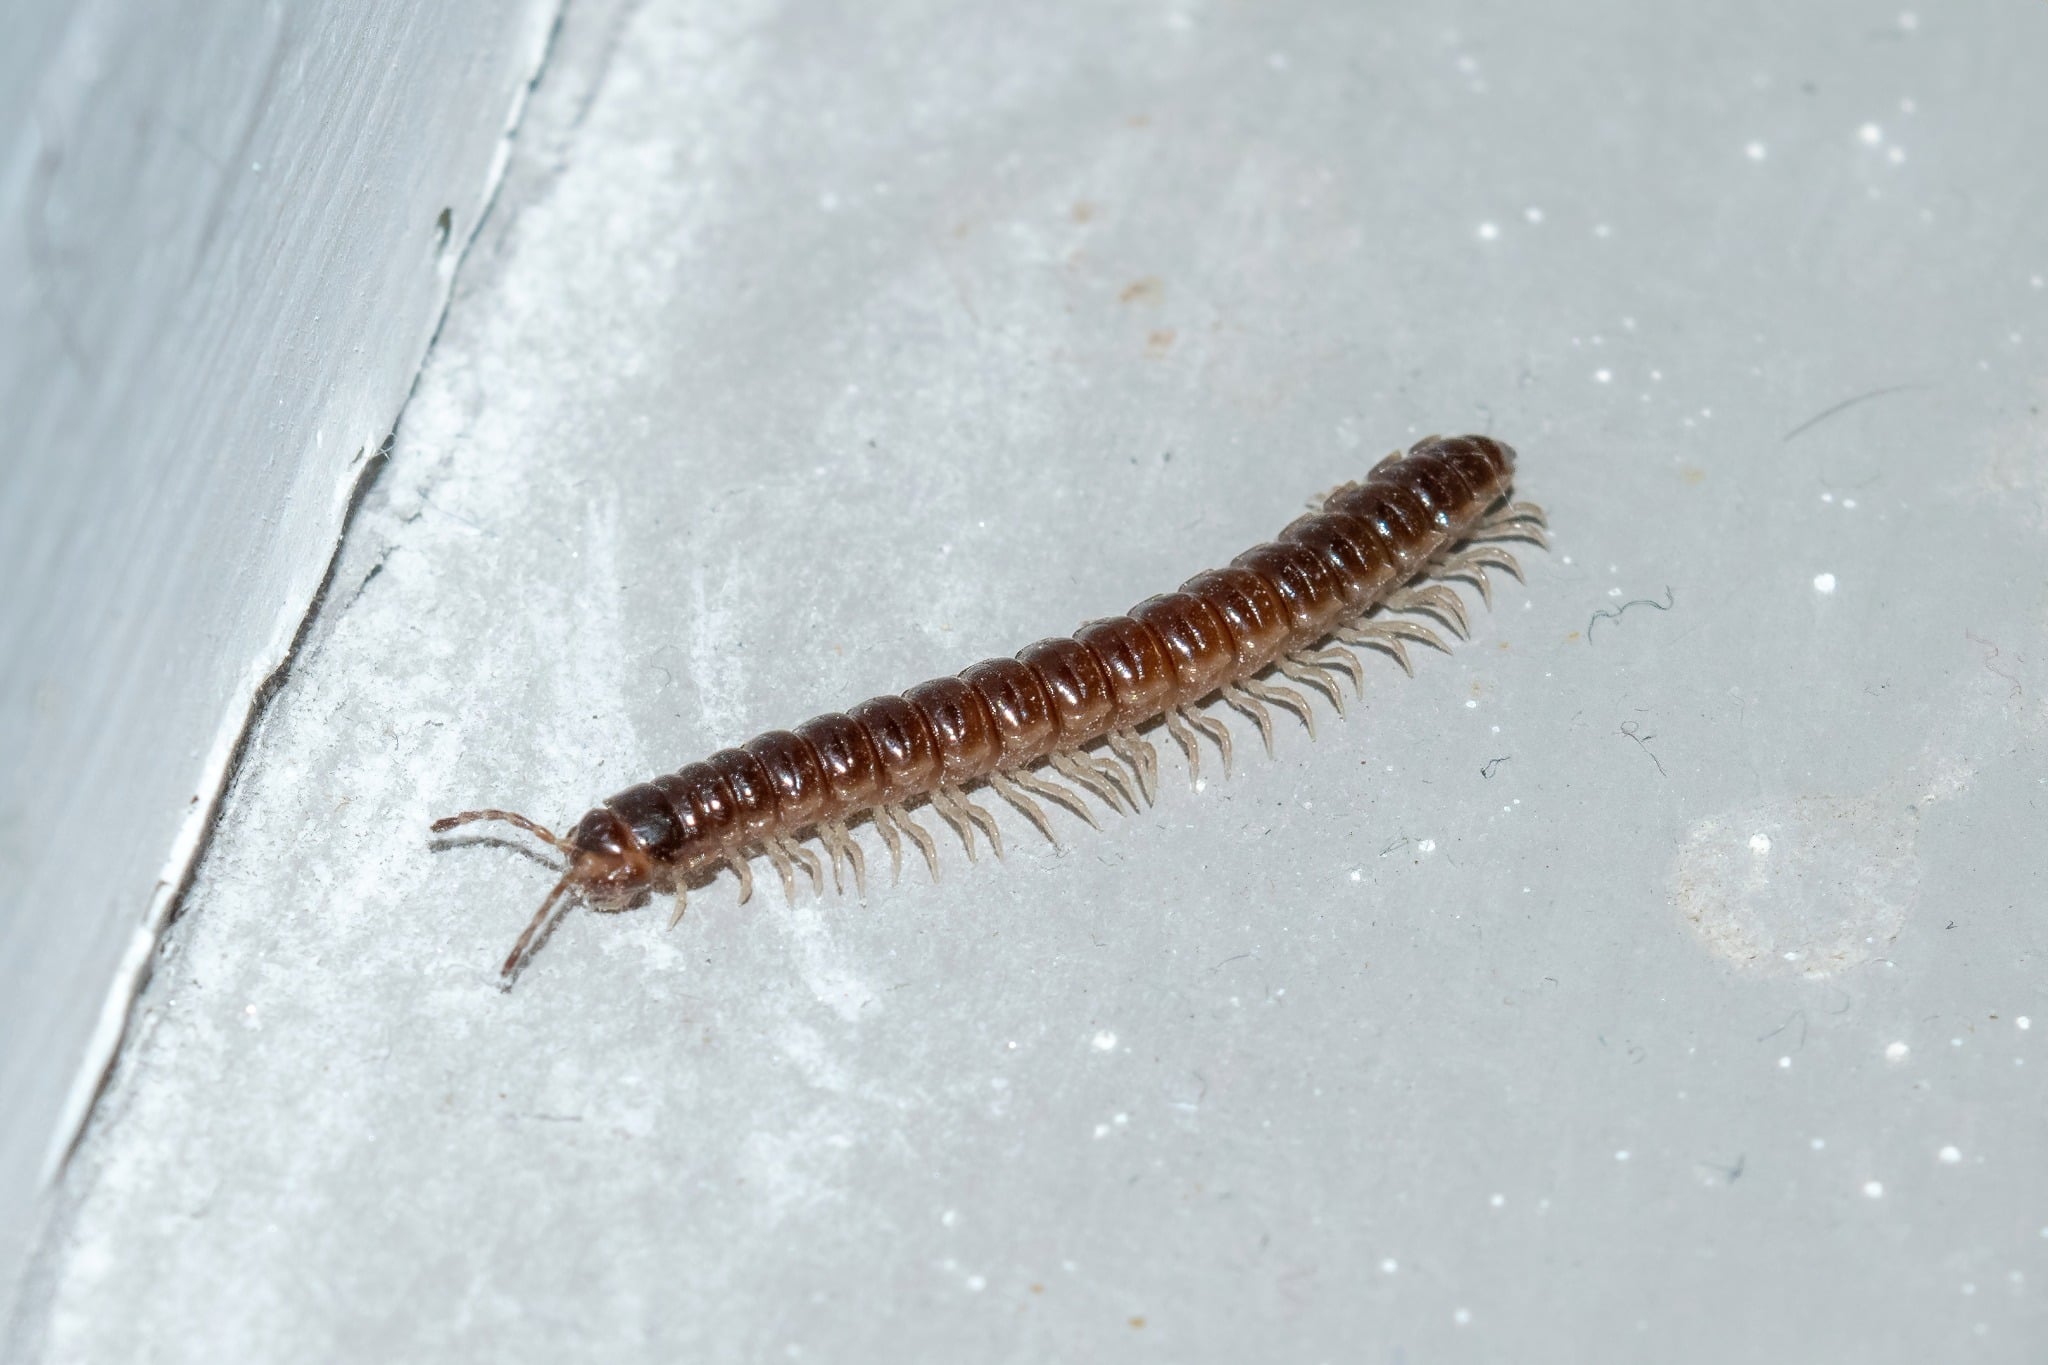 Why Are There Centipedes In My Basement